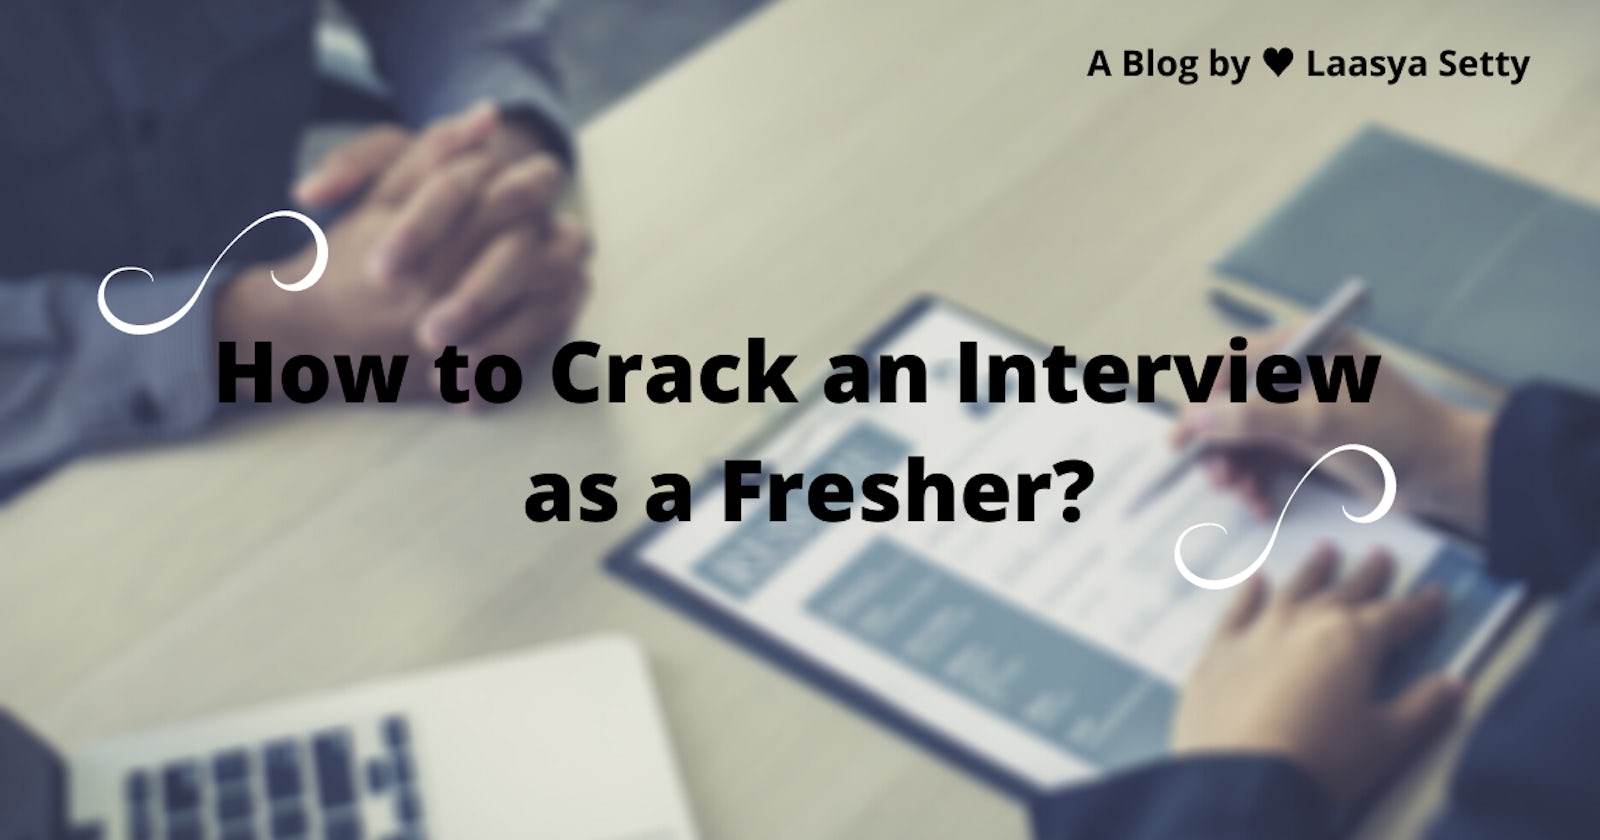 How to Crack an Interview as a Fresher?